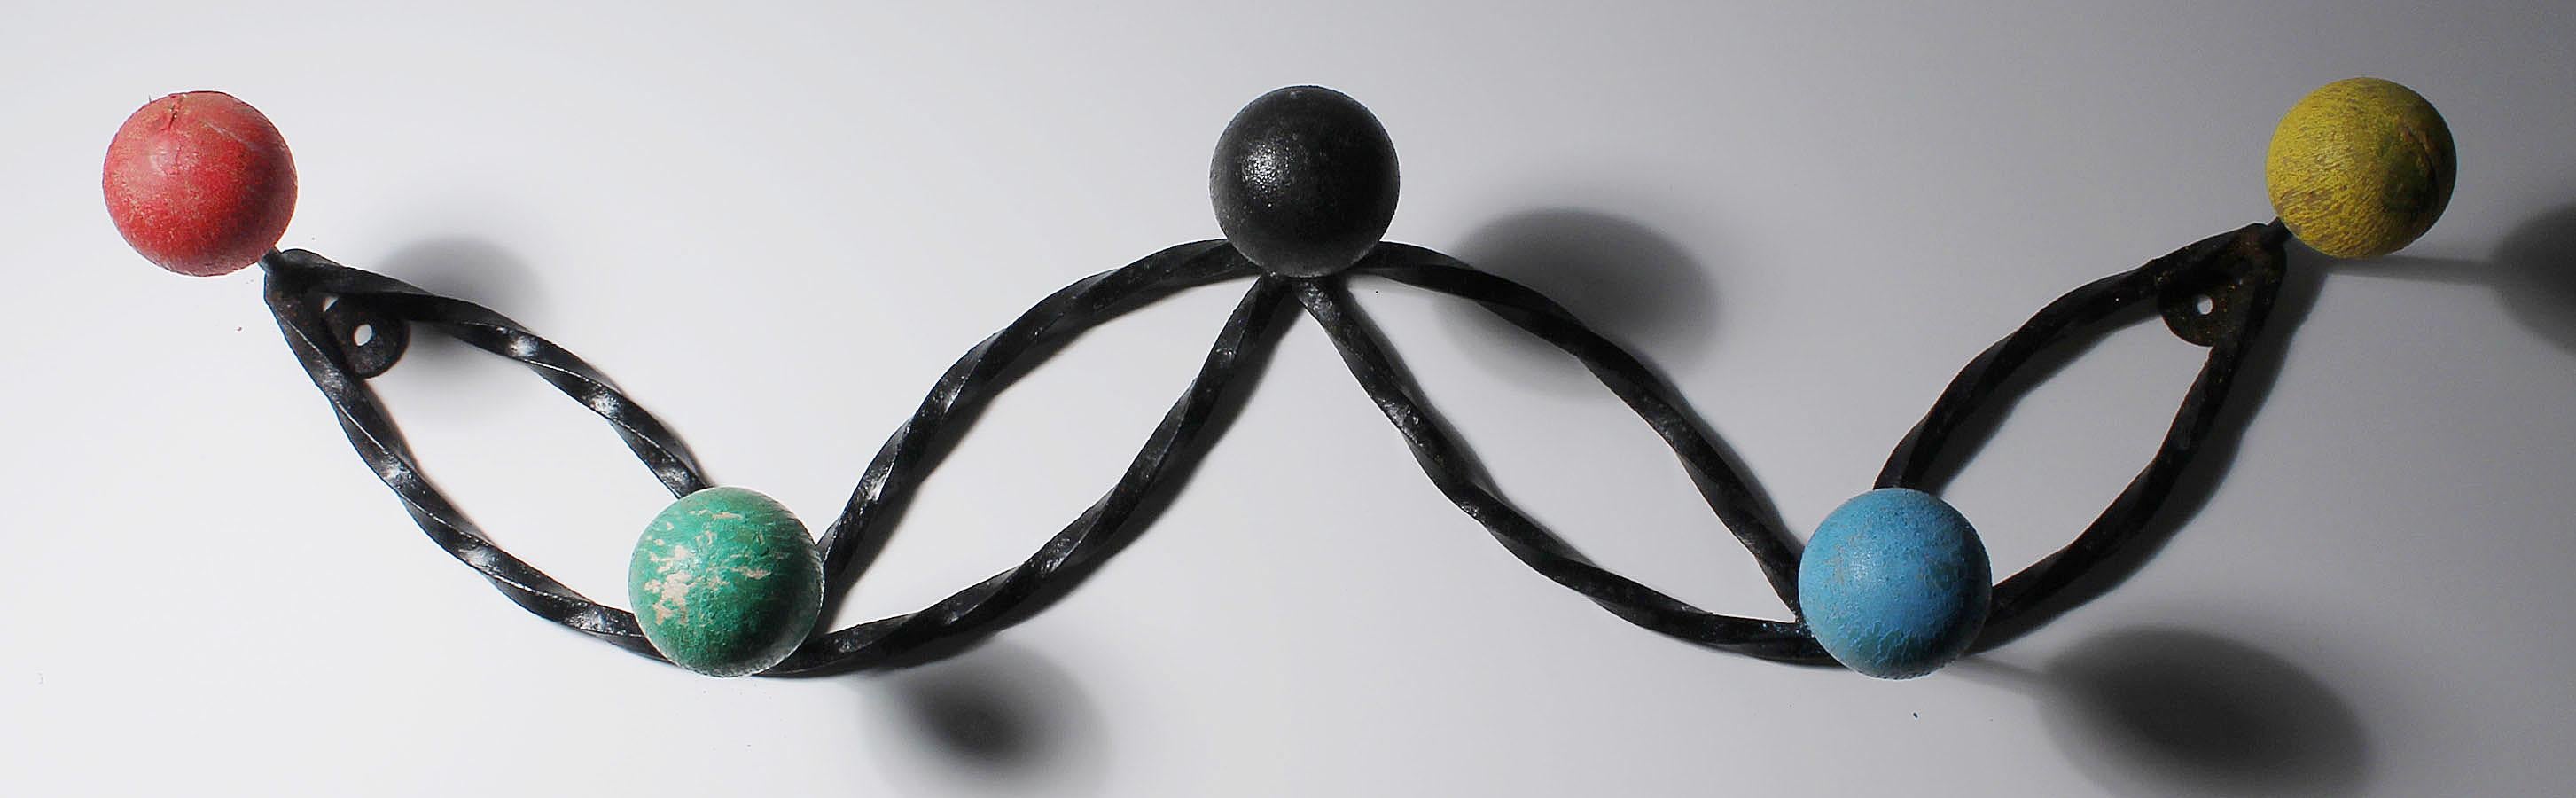 A French modern wall mountable coat rack with colorful painted wood spheres. A decorative twisted wrought iron frame. Appears to be original paint. Style of Jean Royere and Roger Feraud. coatrack